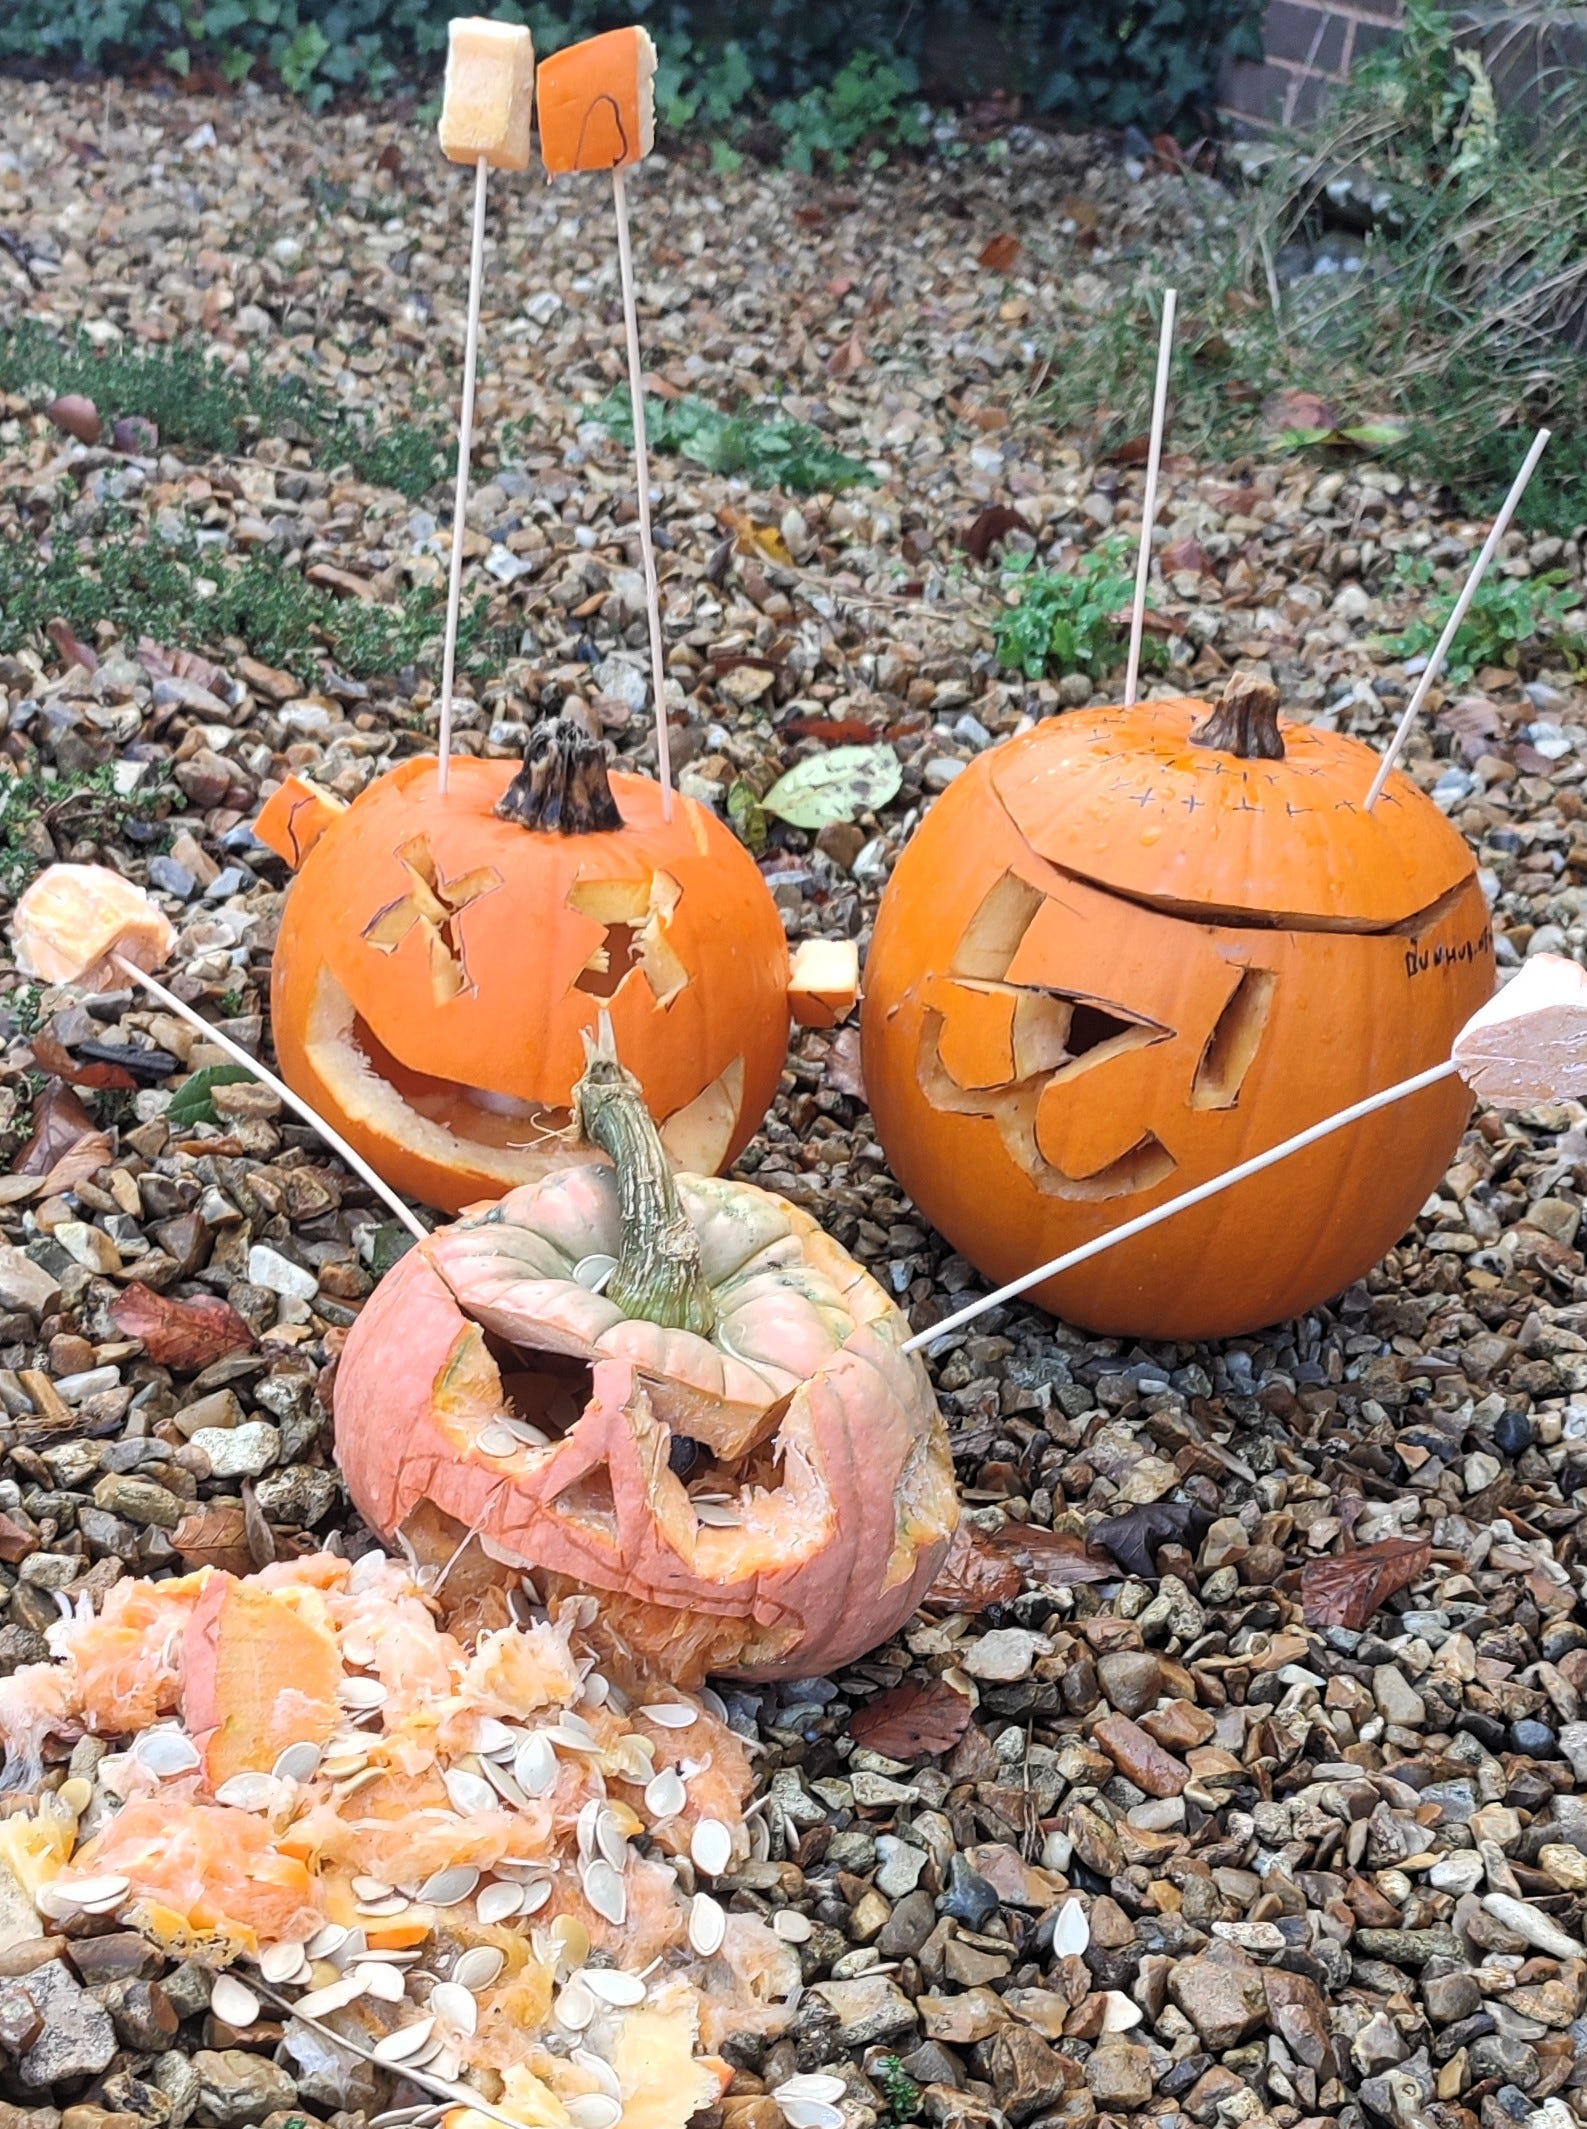 My daughters' trio of pumpkins. Two of them are distinctly alien-esque with kebab skewers rammed through their poor orange skulls, and one of them is yukking up its own innards.